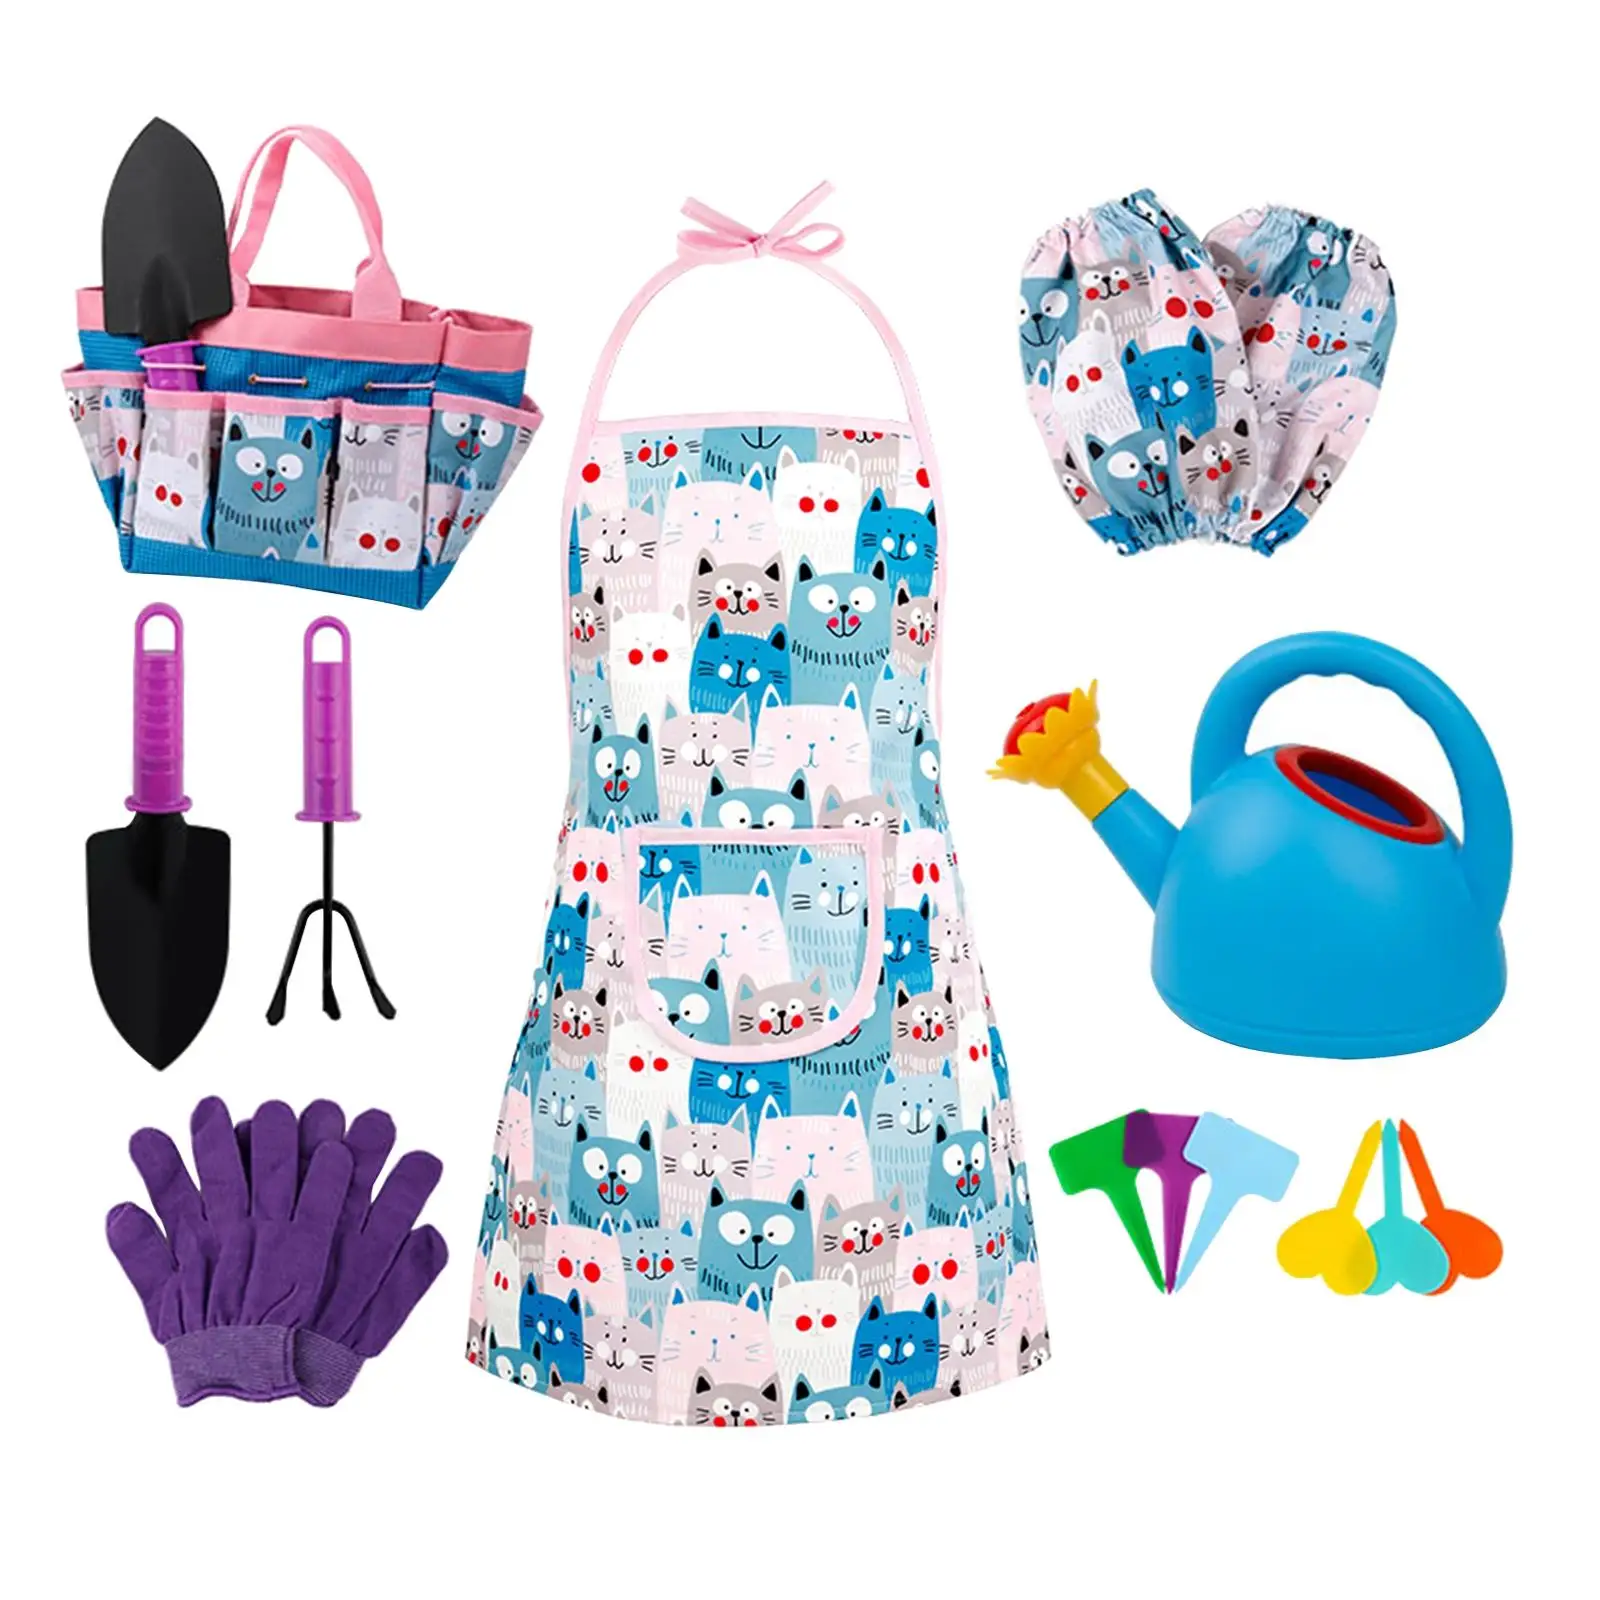 Kids Gardening Tool 6 Grounding Stakes Cat Pattern Apron Pointed Shovels Toys with Tote Bag Sand Pits Toys for Age 3+ Hand Tools